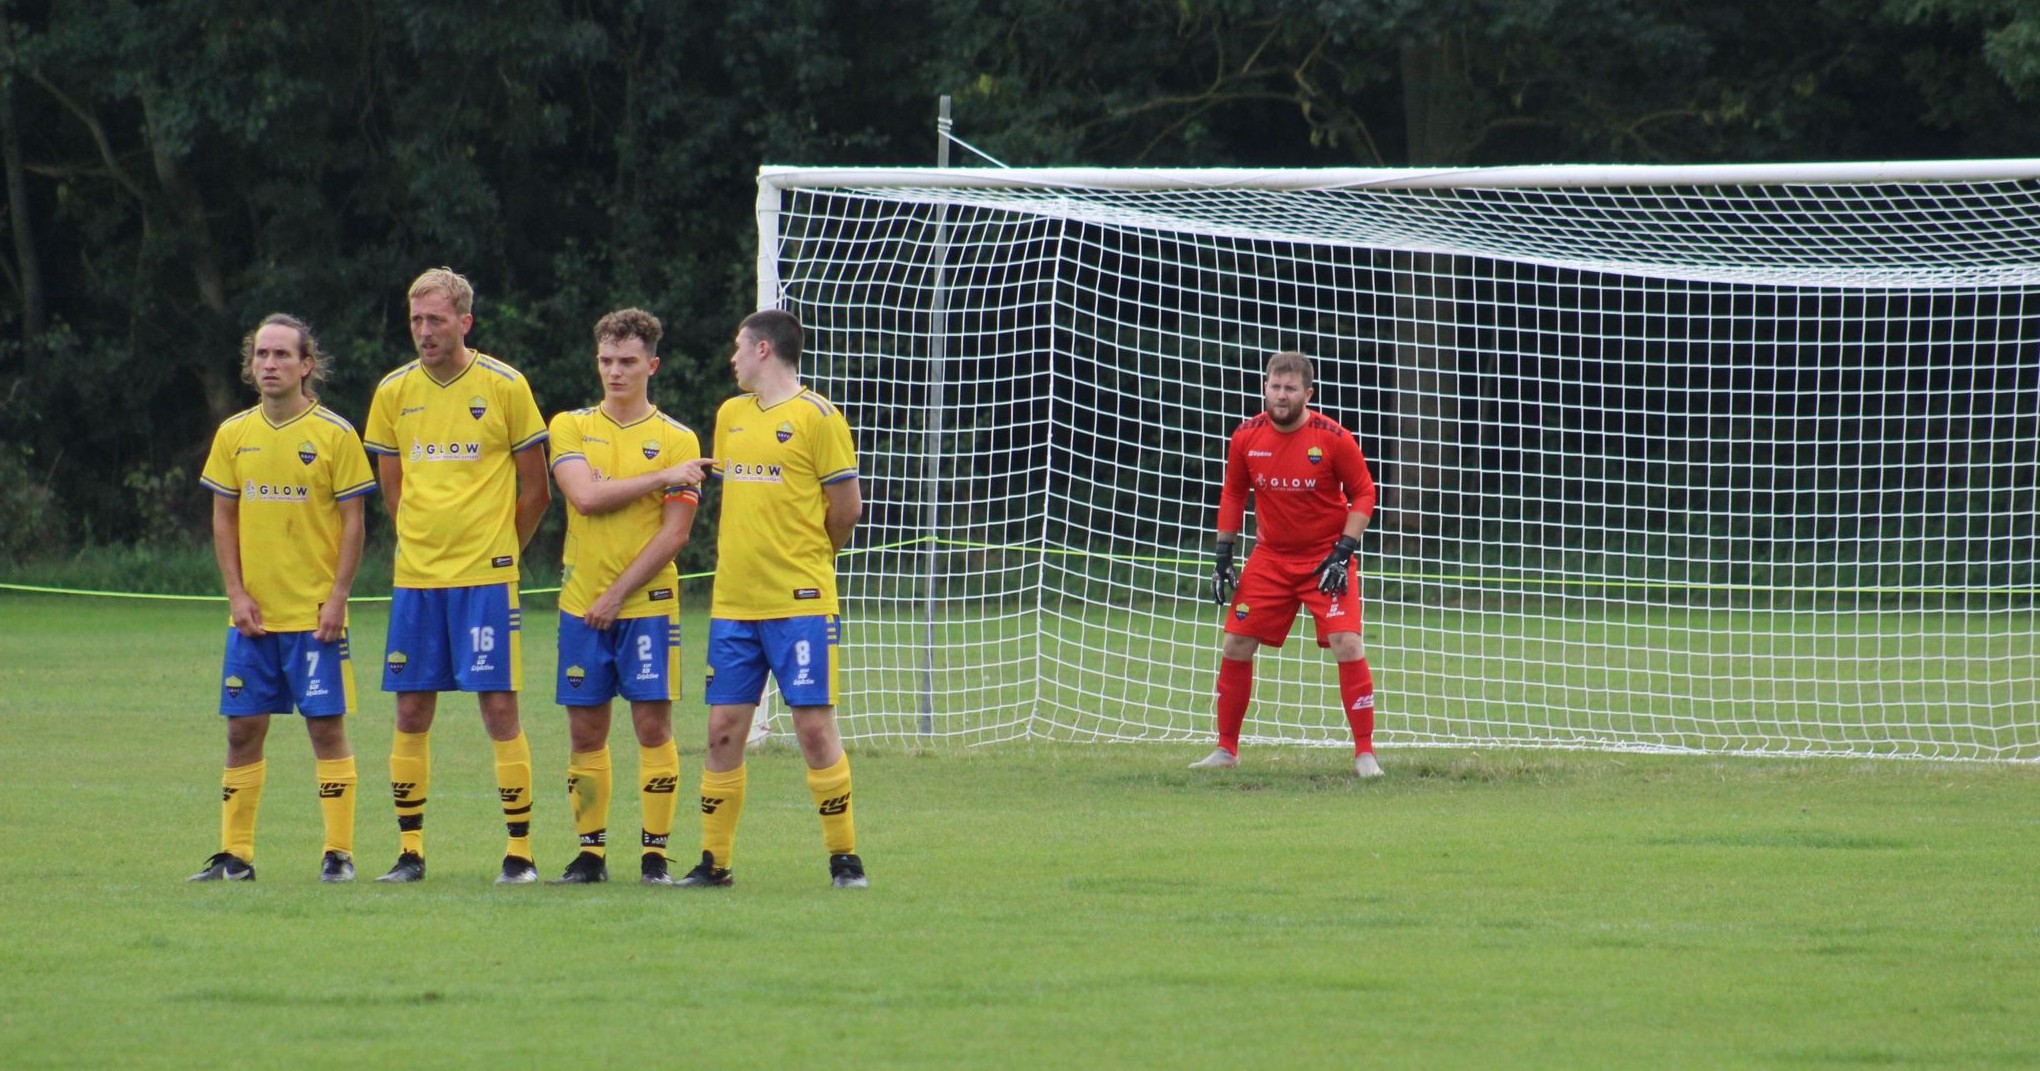 Sutton Bonington FC playing against Holwell Sports FC Reserves